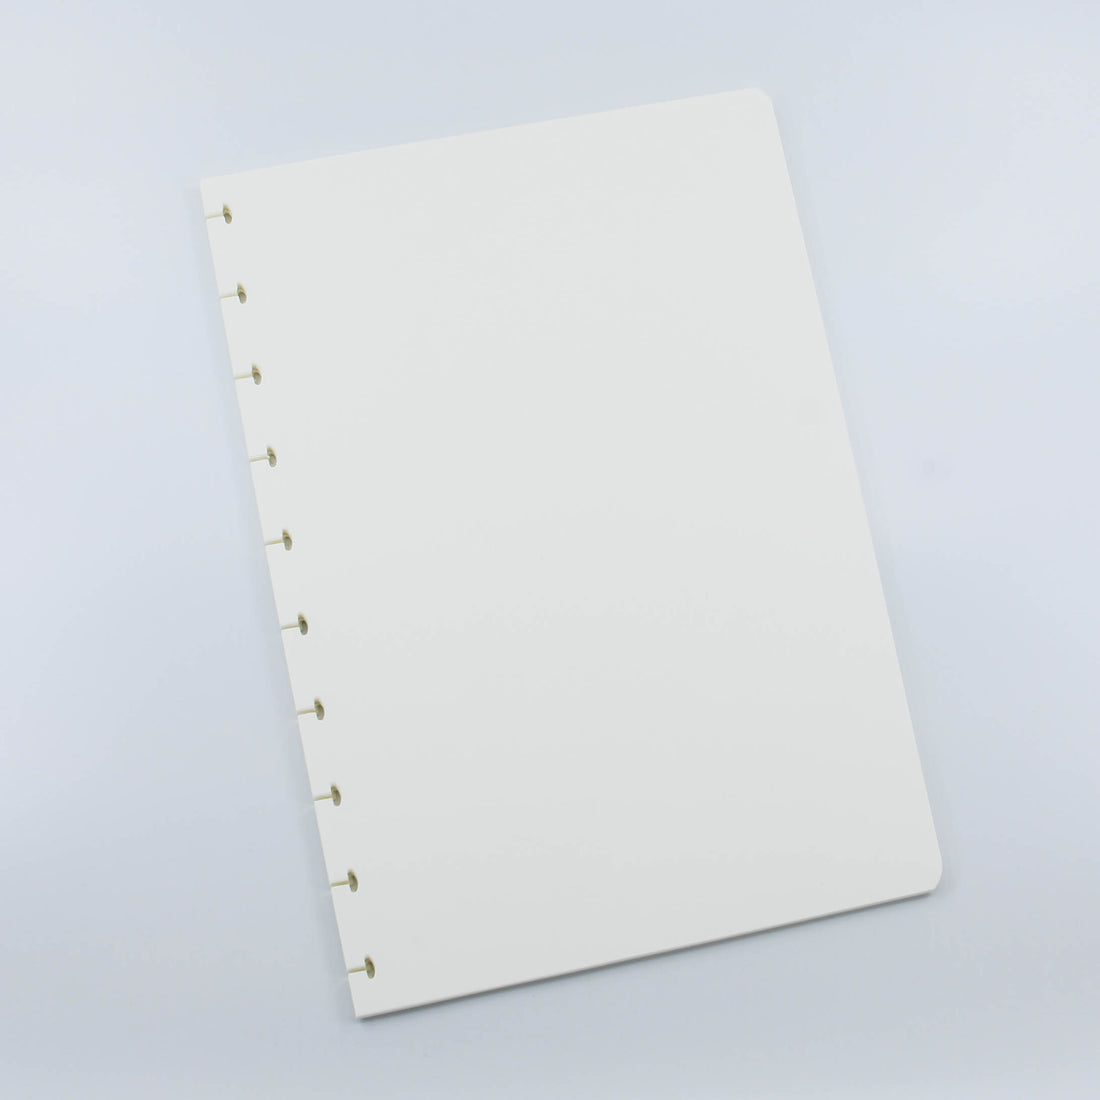 Blank notebook pages refill